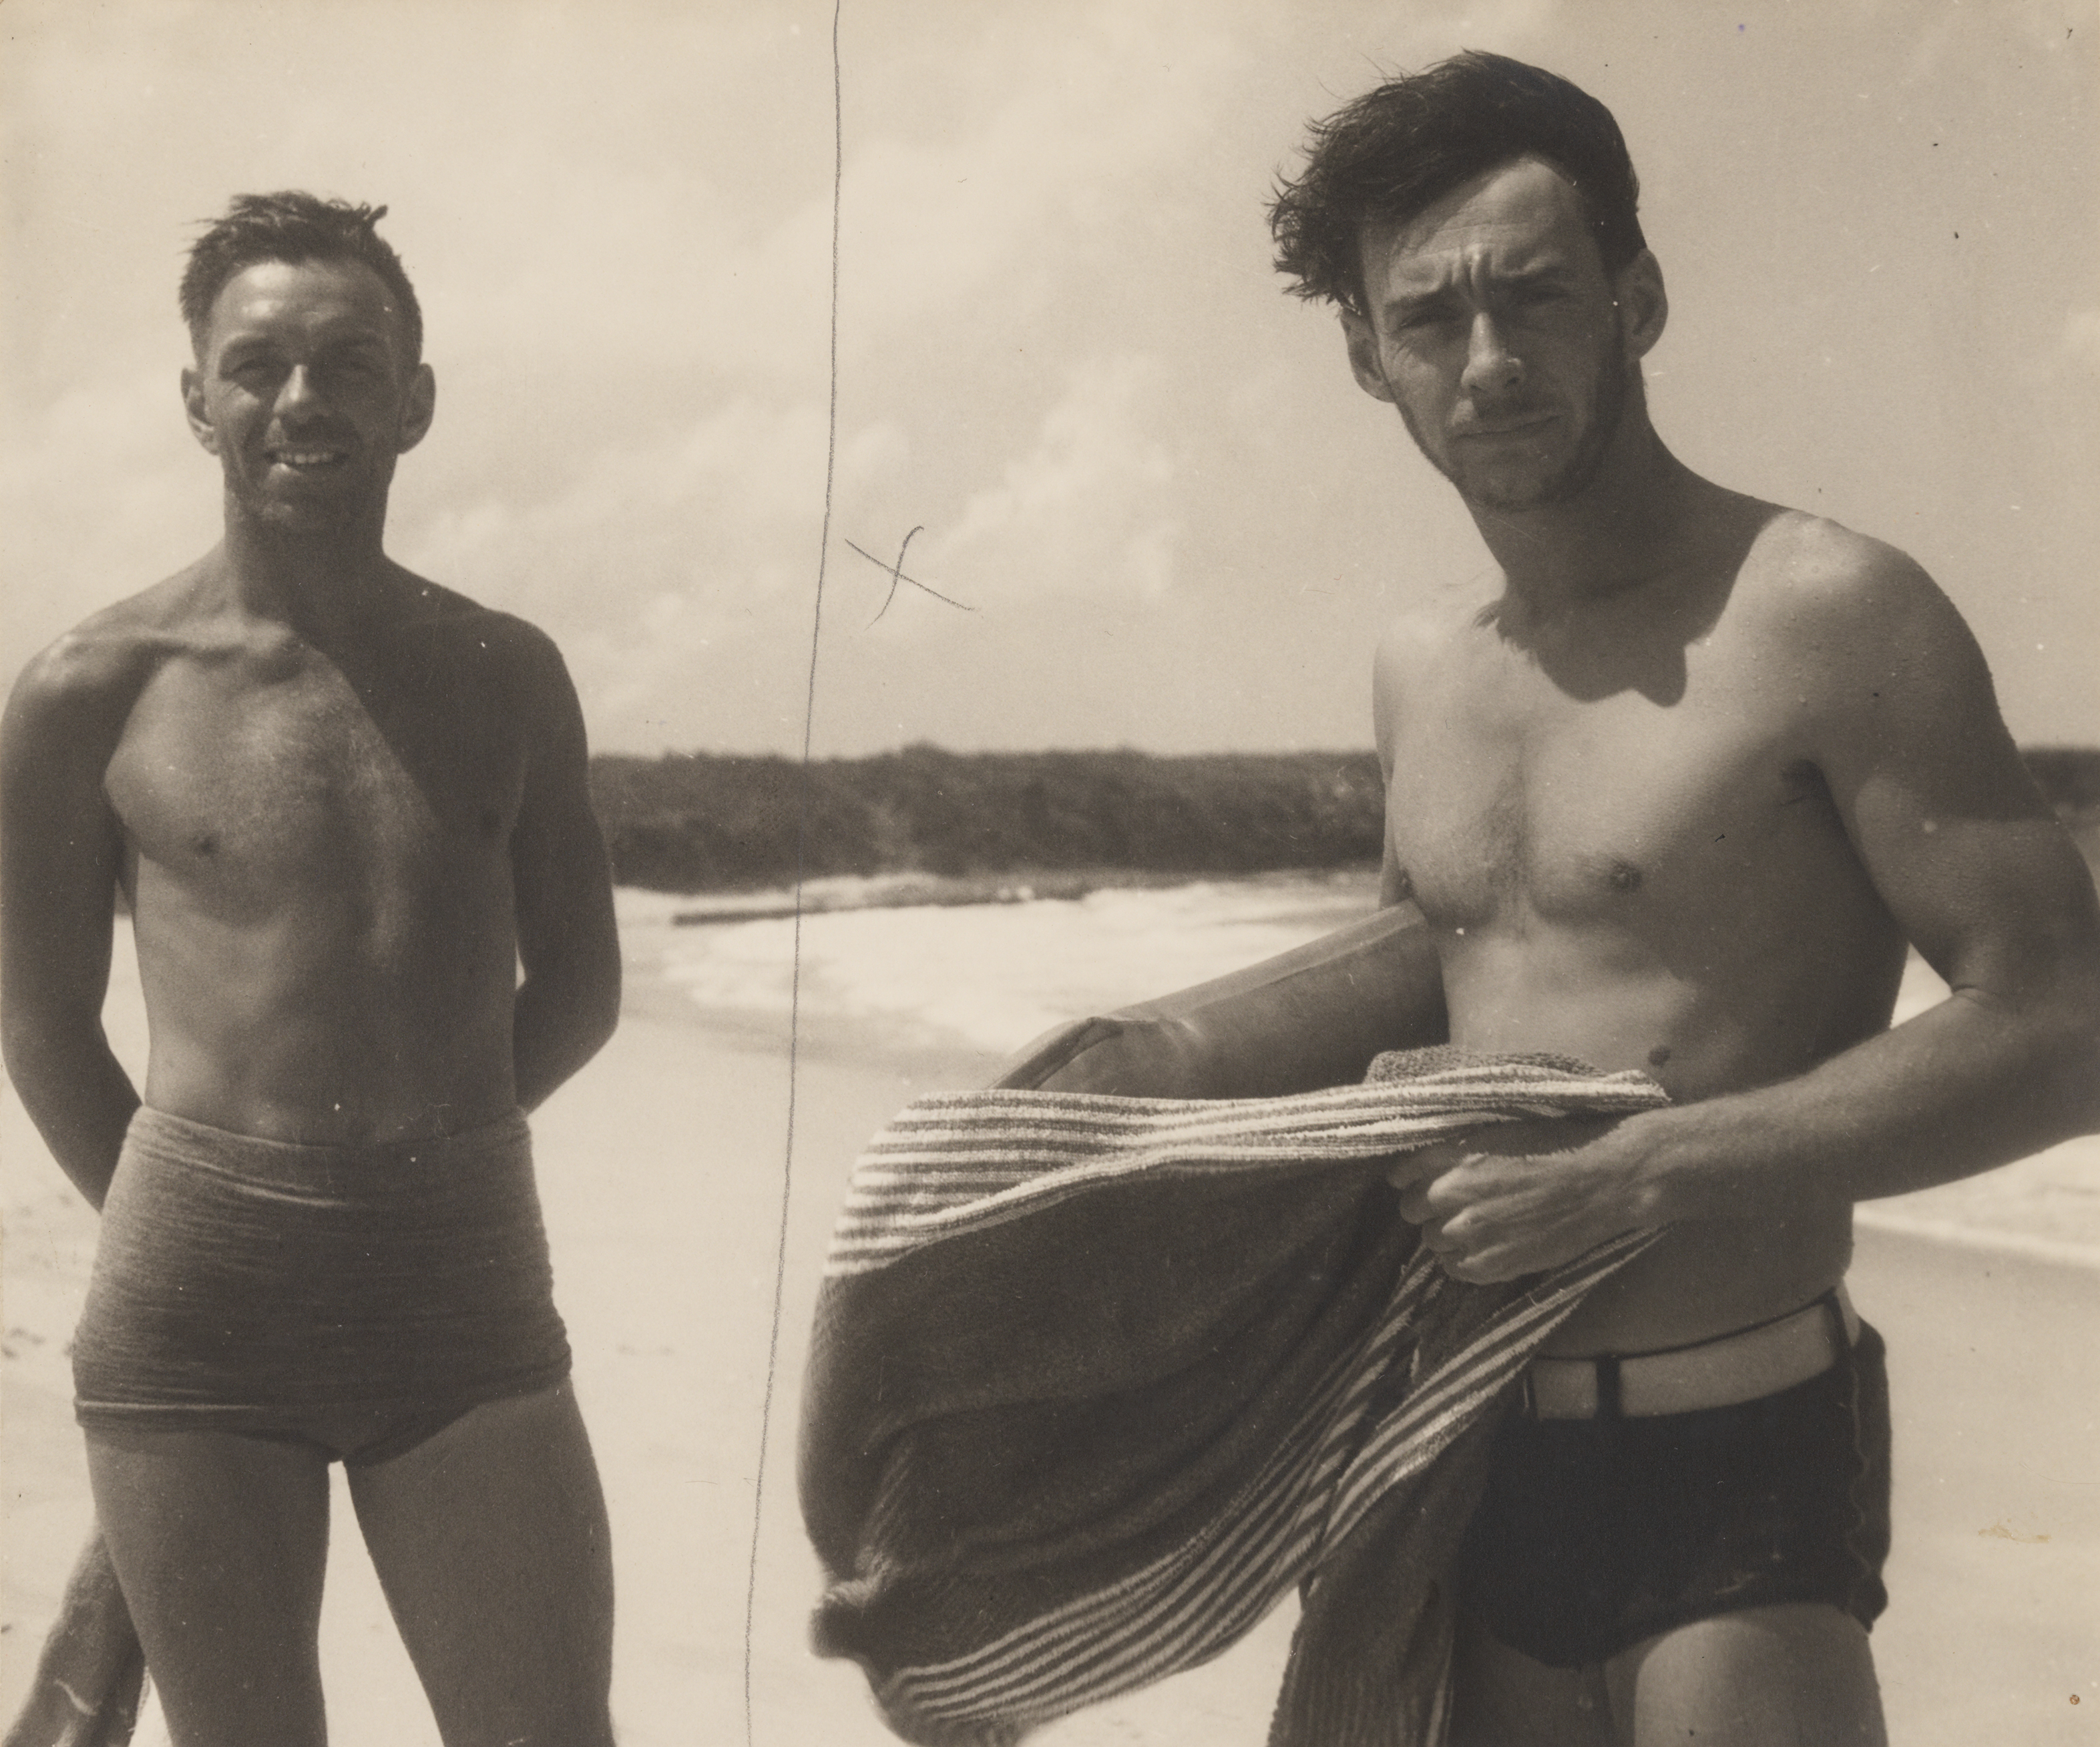 A sepia photograph of two men standing side by side on a beach, looking at the camera smiling - they wear 1930s style bathing shorts and hold towels